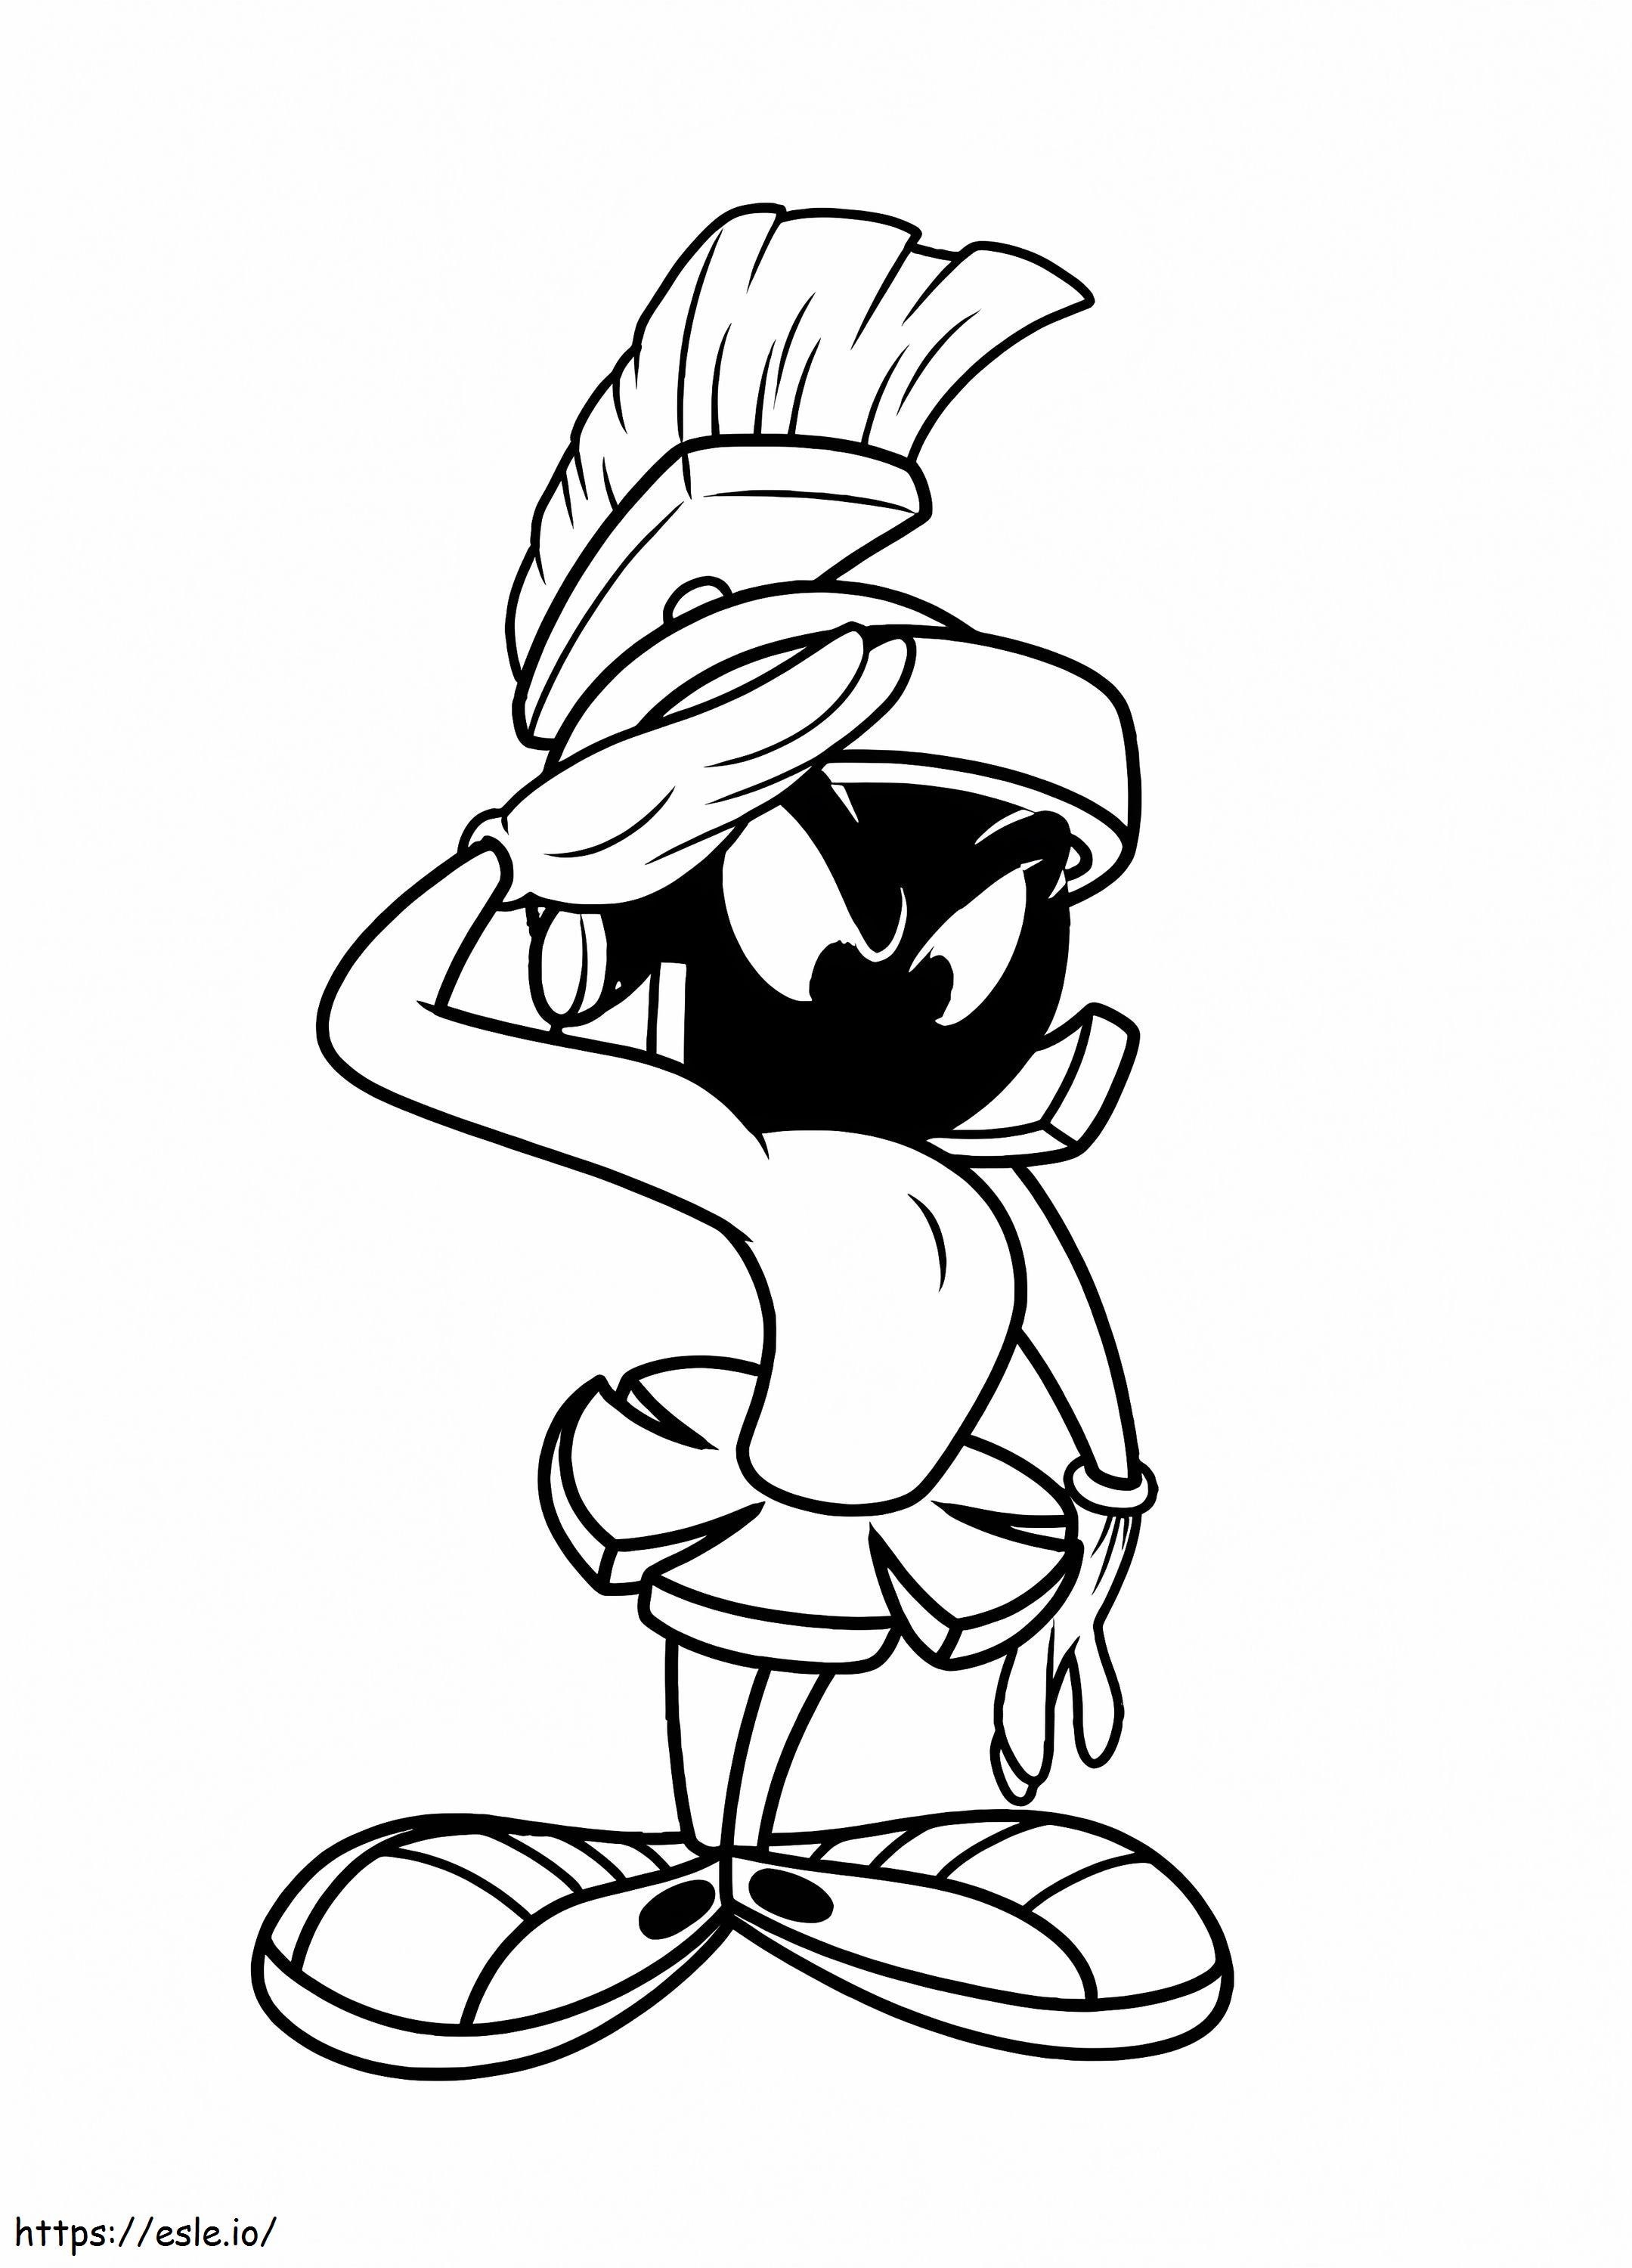 Marvin The Martian Looney Tunes coloring page